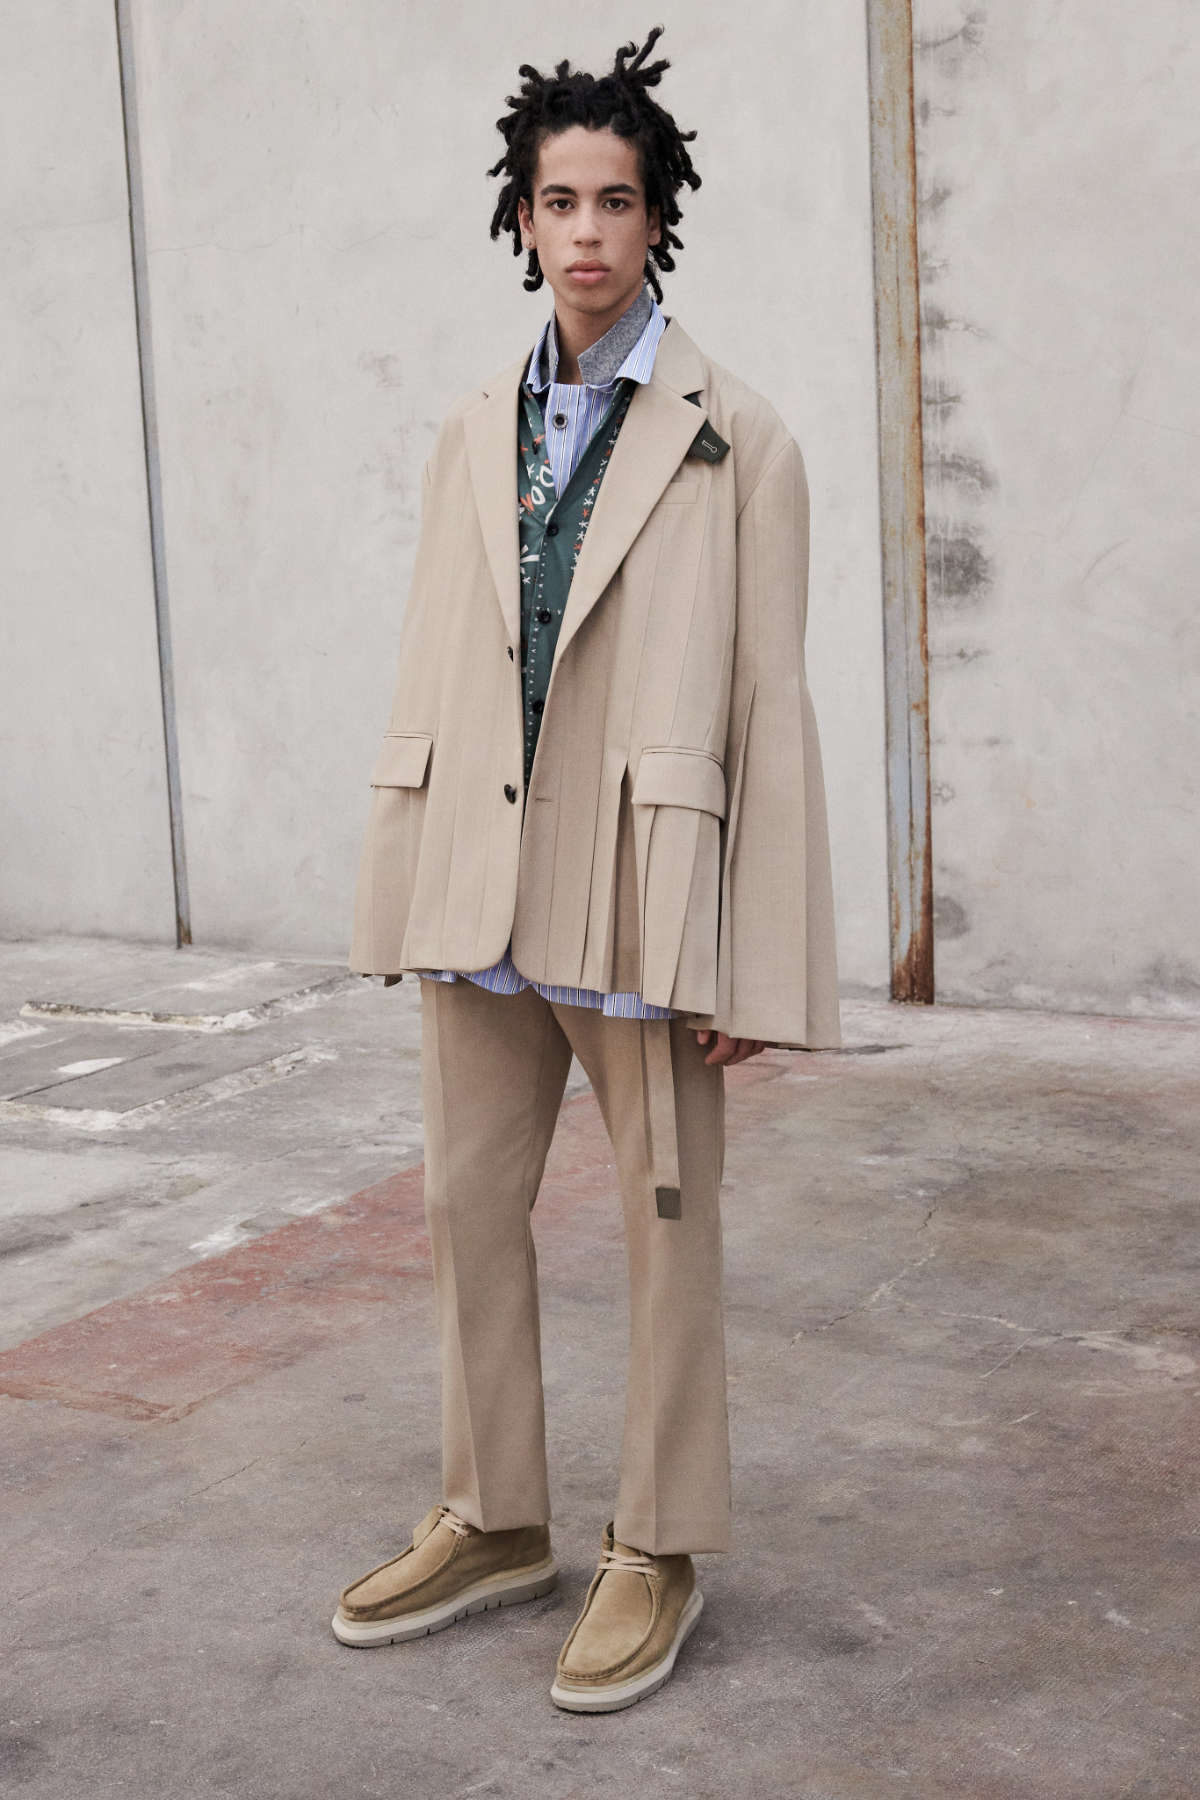 Sacai Presents Its New Spring 2023 Collection